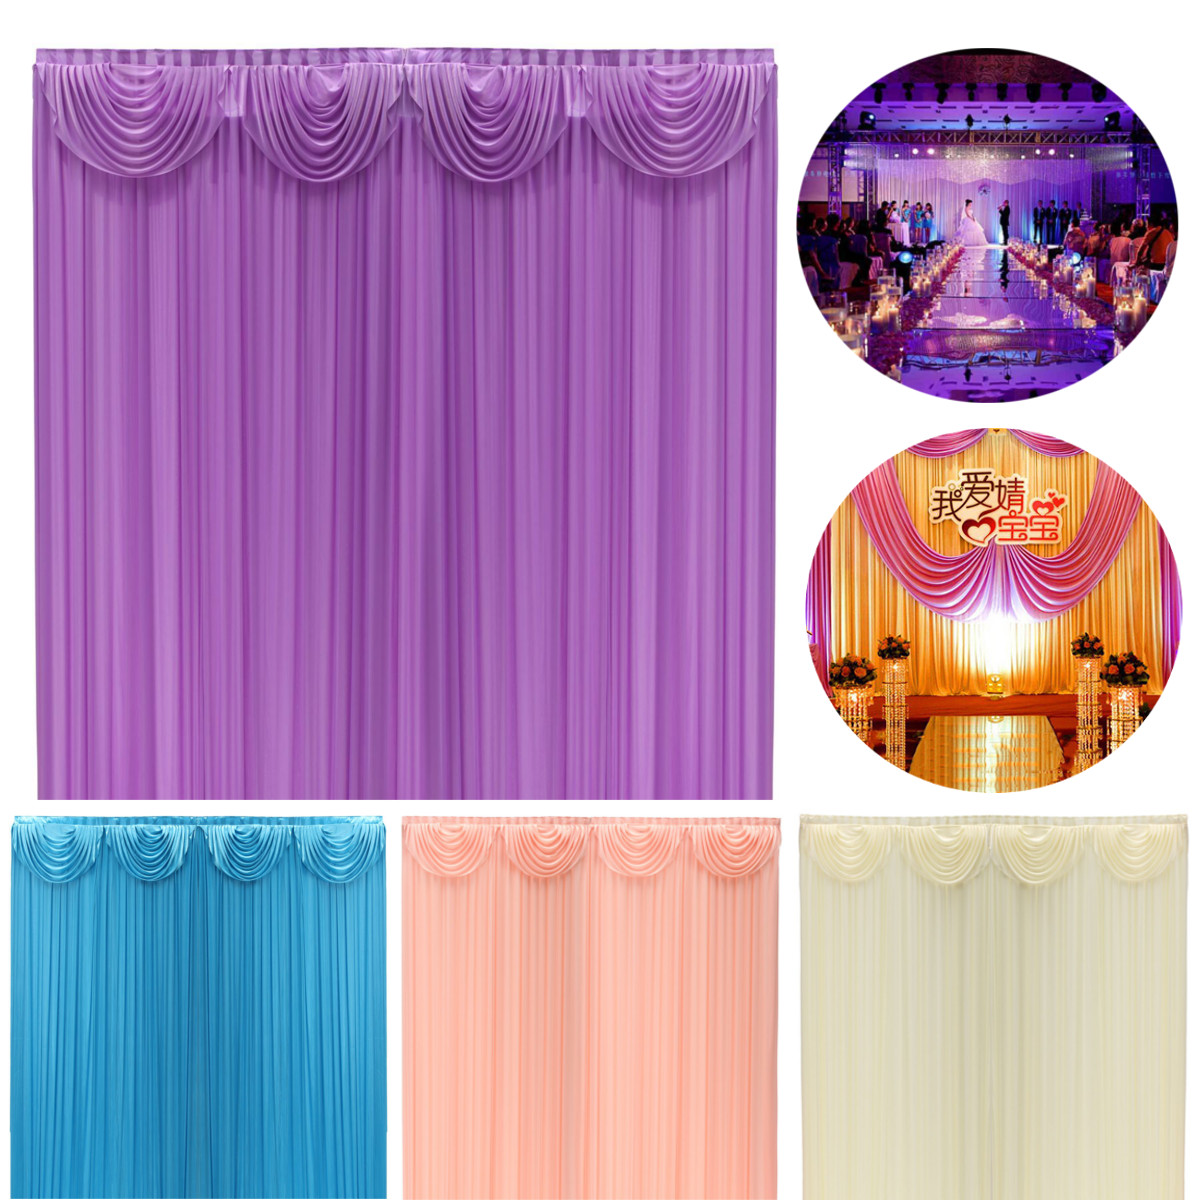 2M-X-2M-White-Stage-Background-Backdrop-Drape-Curtain-Swags-Wedding-Party--US-1304896-4